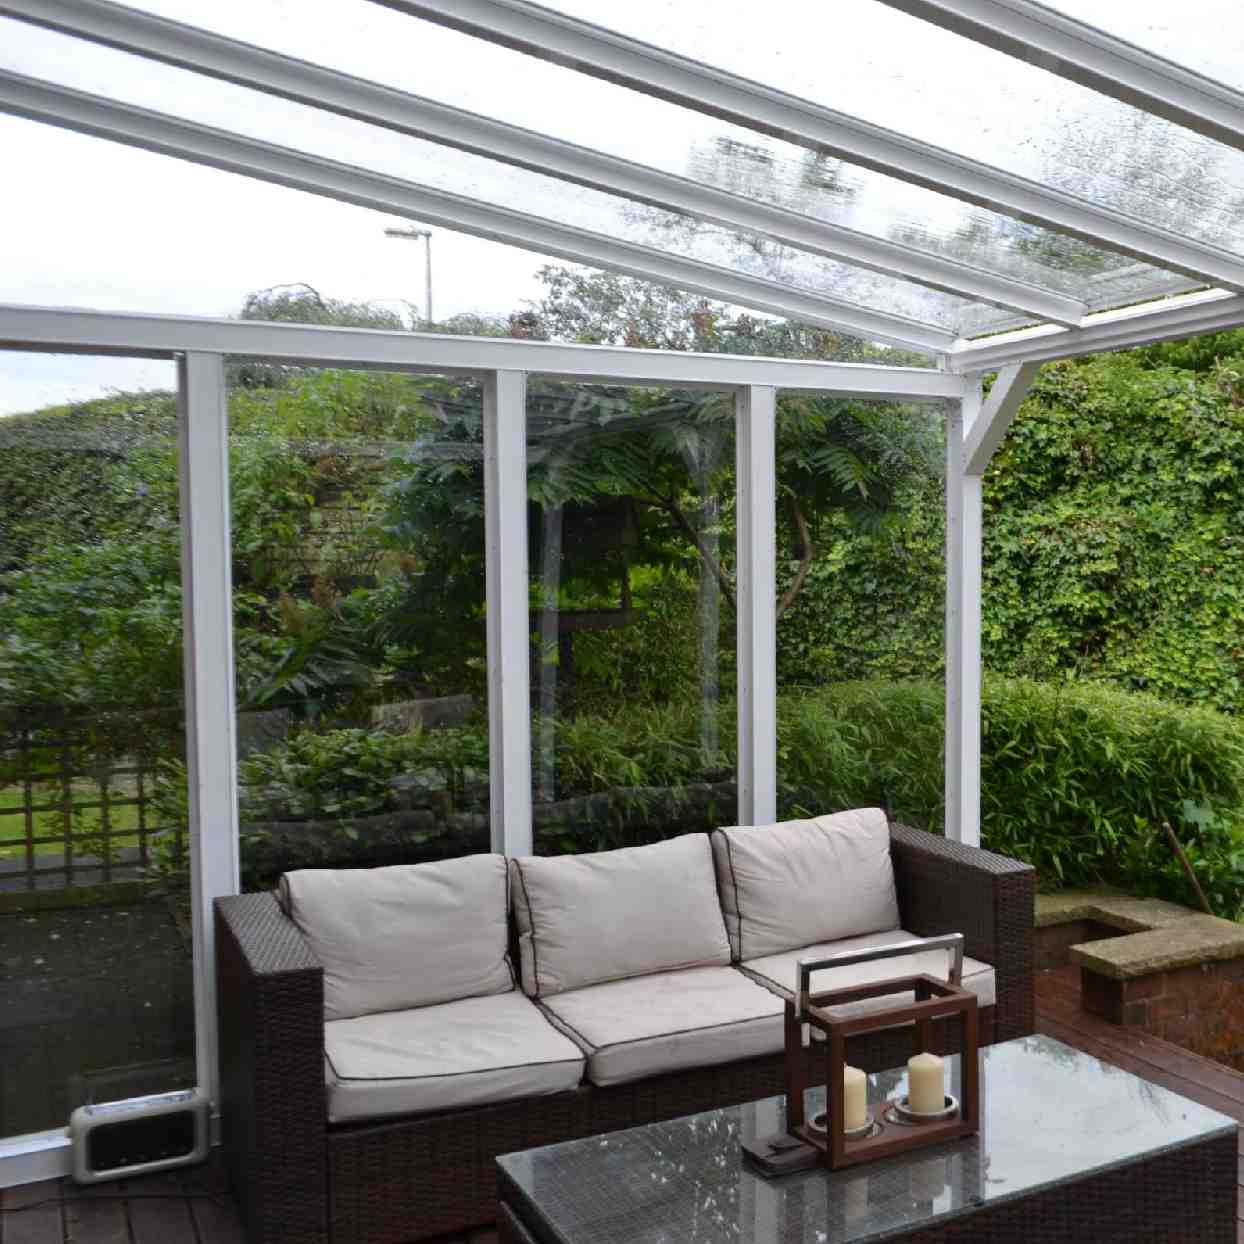 Buy Omega Verandah White with 16mm Polycarbonate Glazing - 5.2m (W) x 3.0m (P), (3) Supporting Posts online today